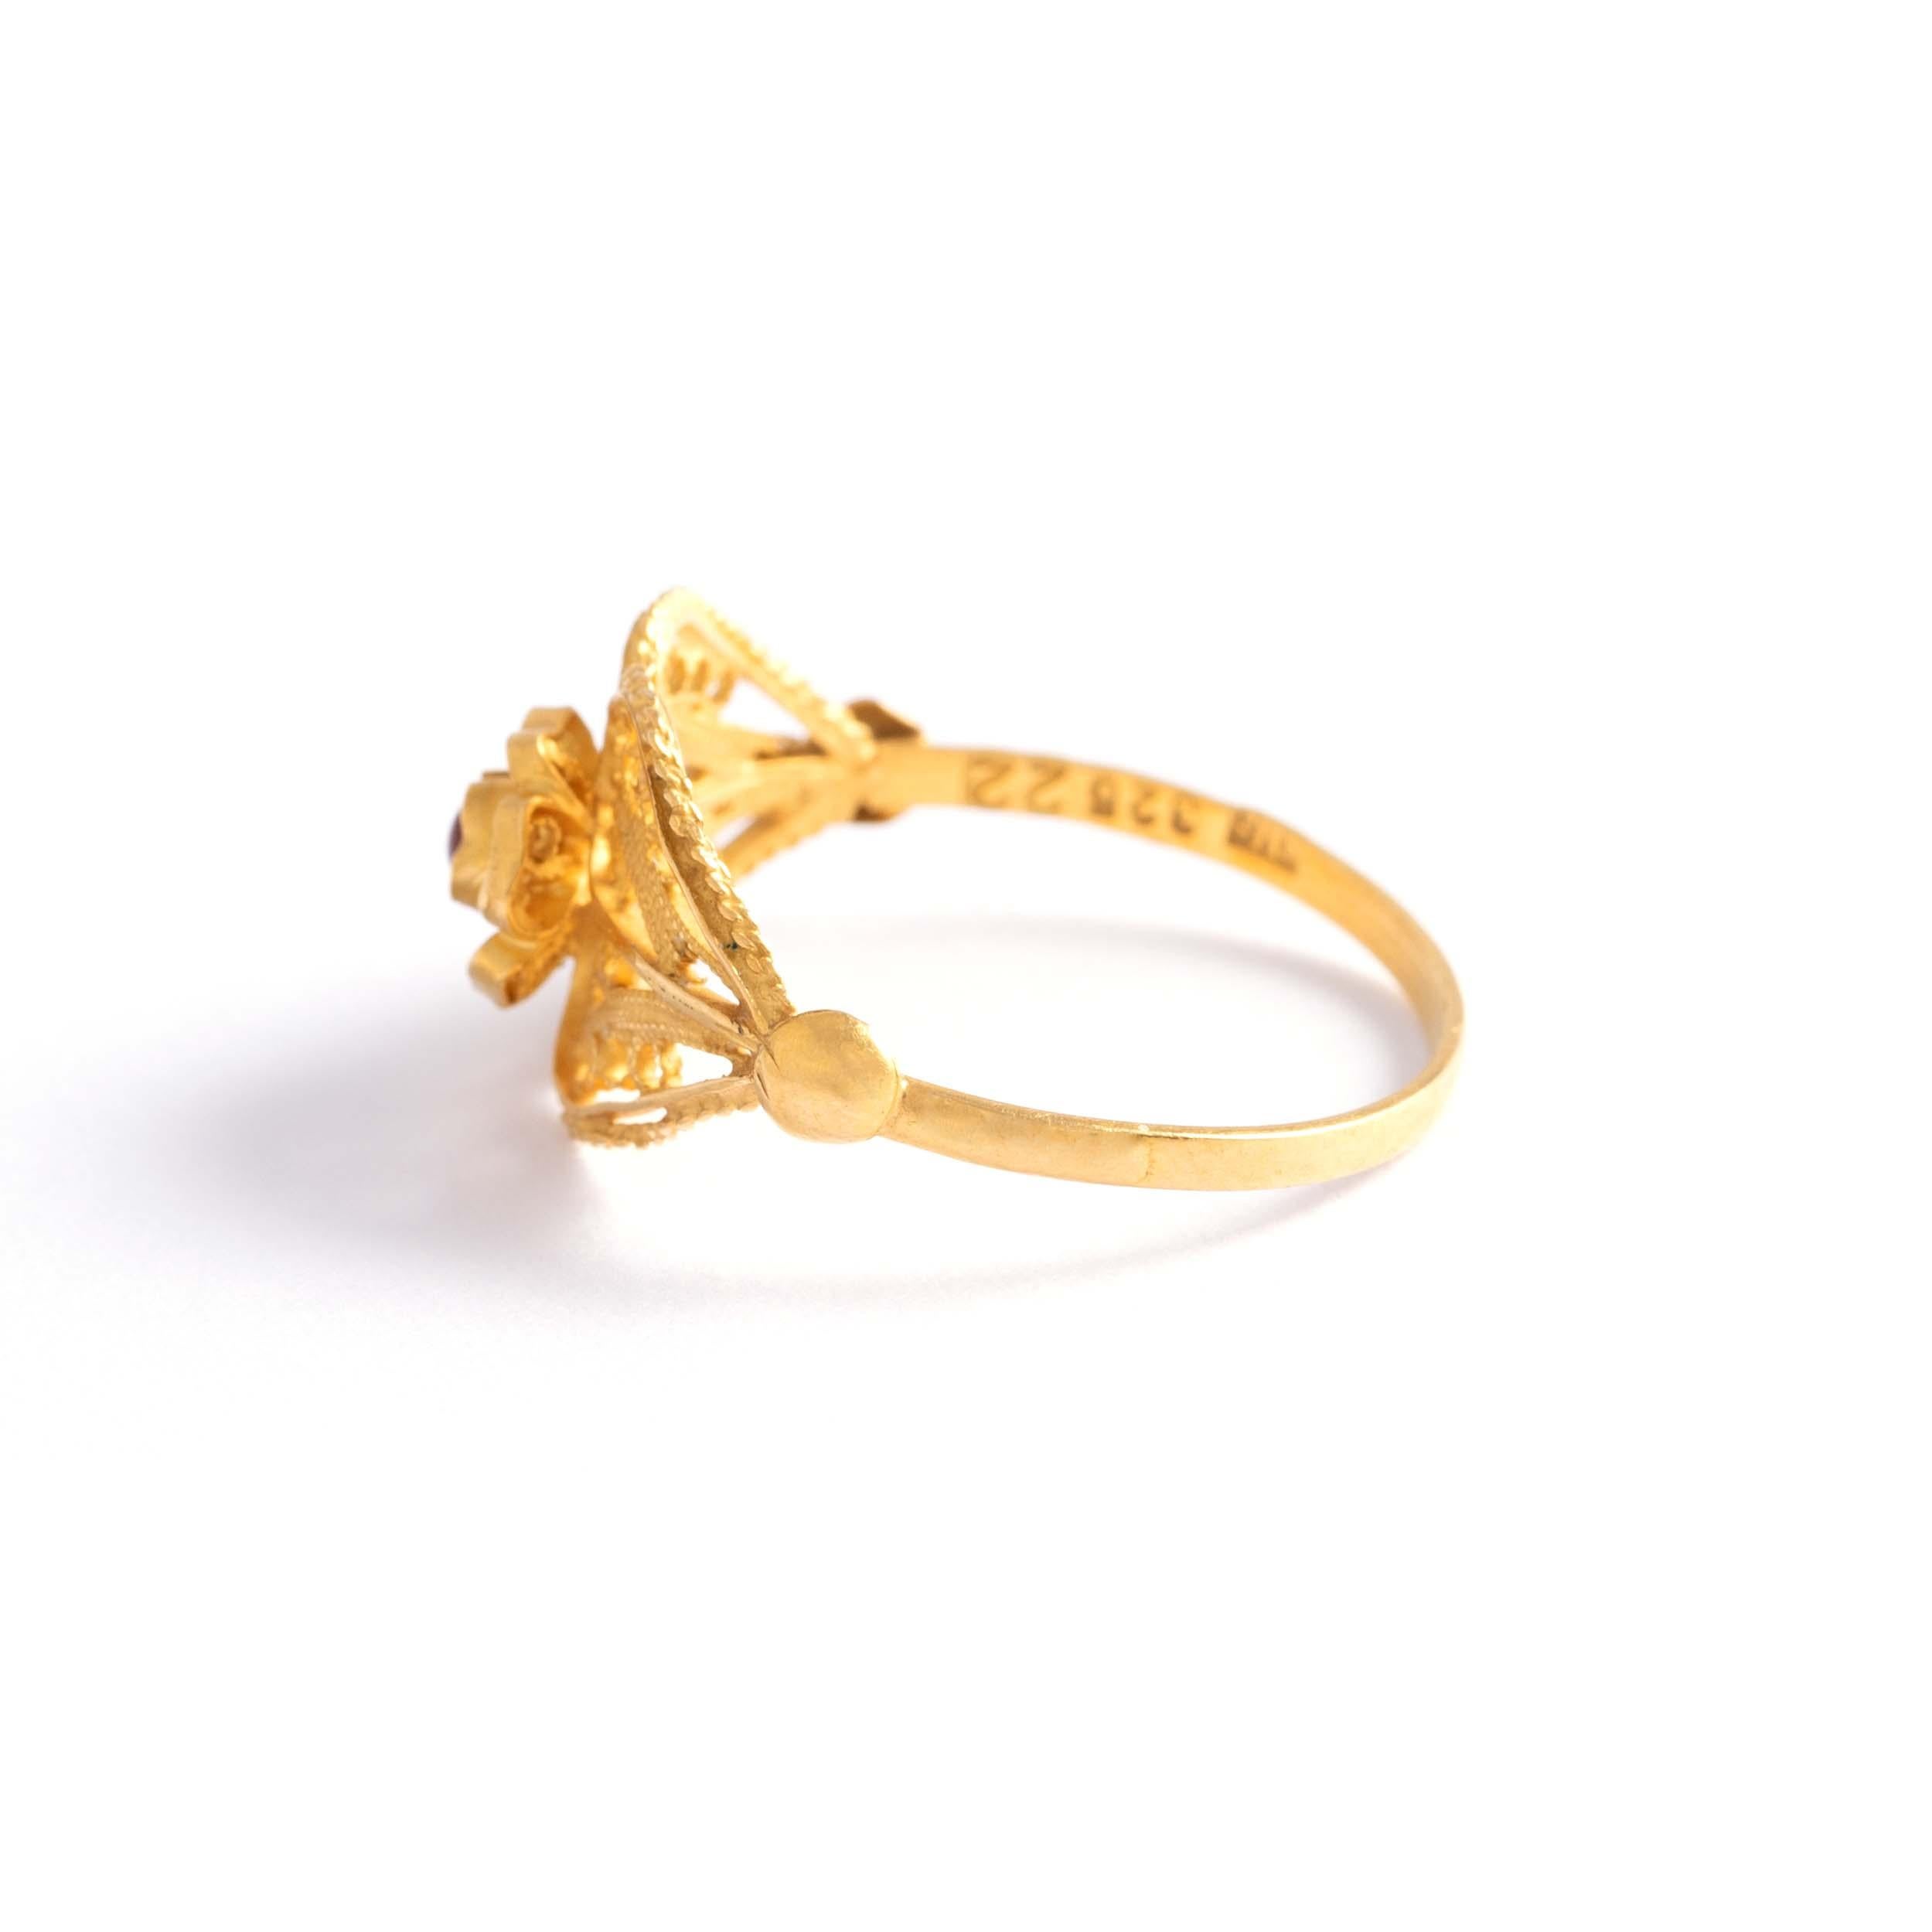 Women's or Men's Antique Yellow Gold Ring For Sale